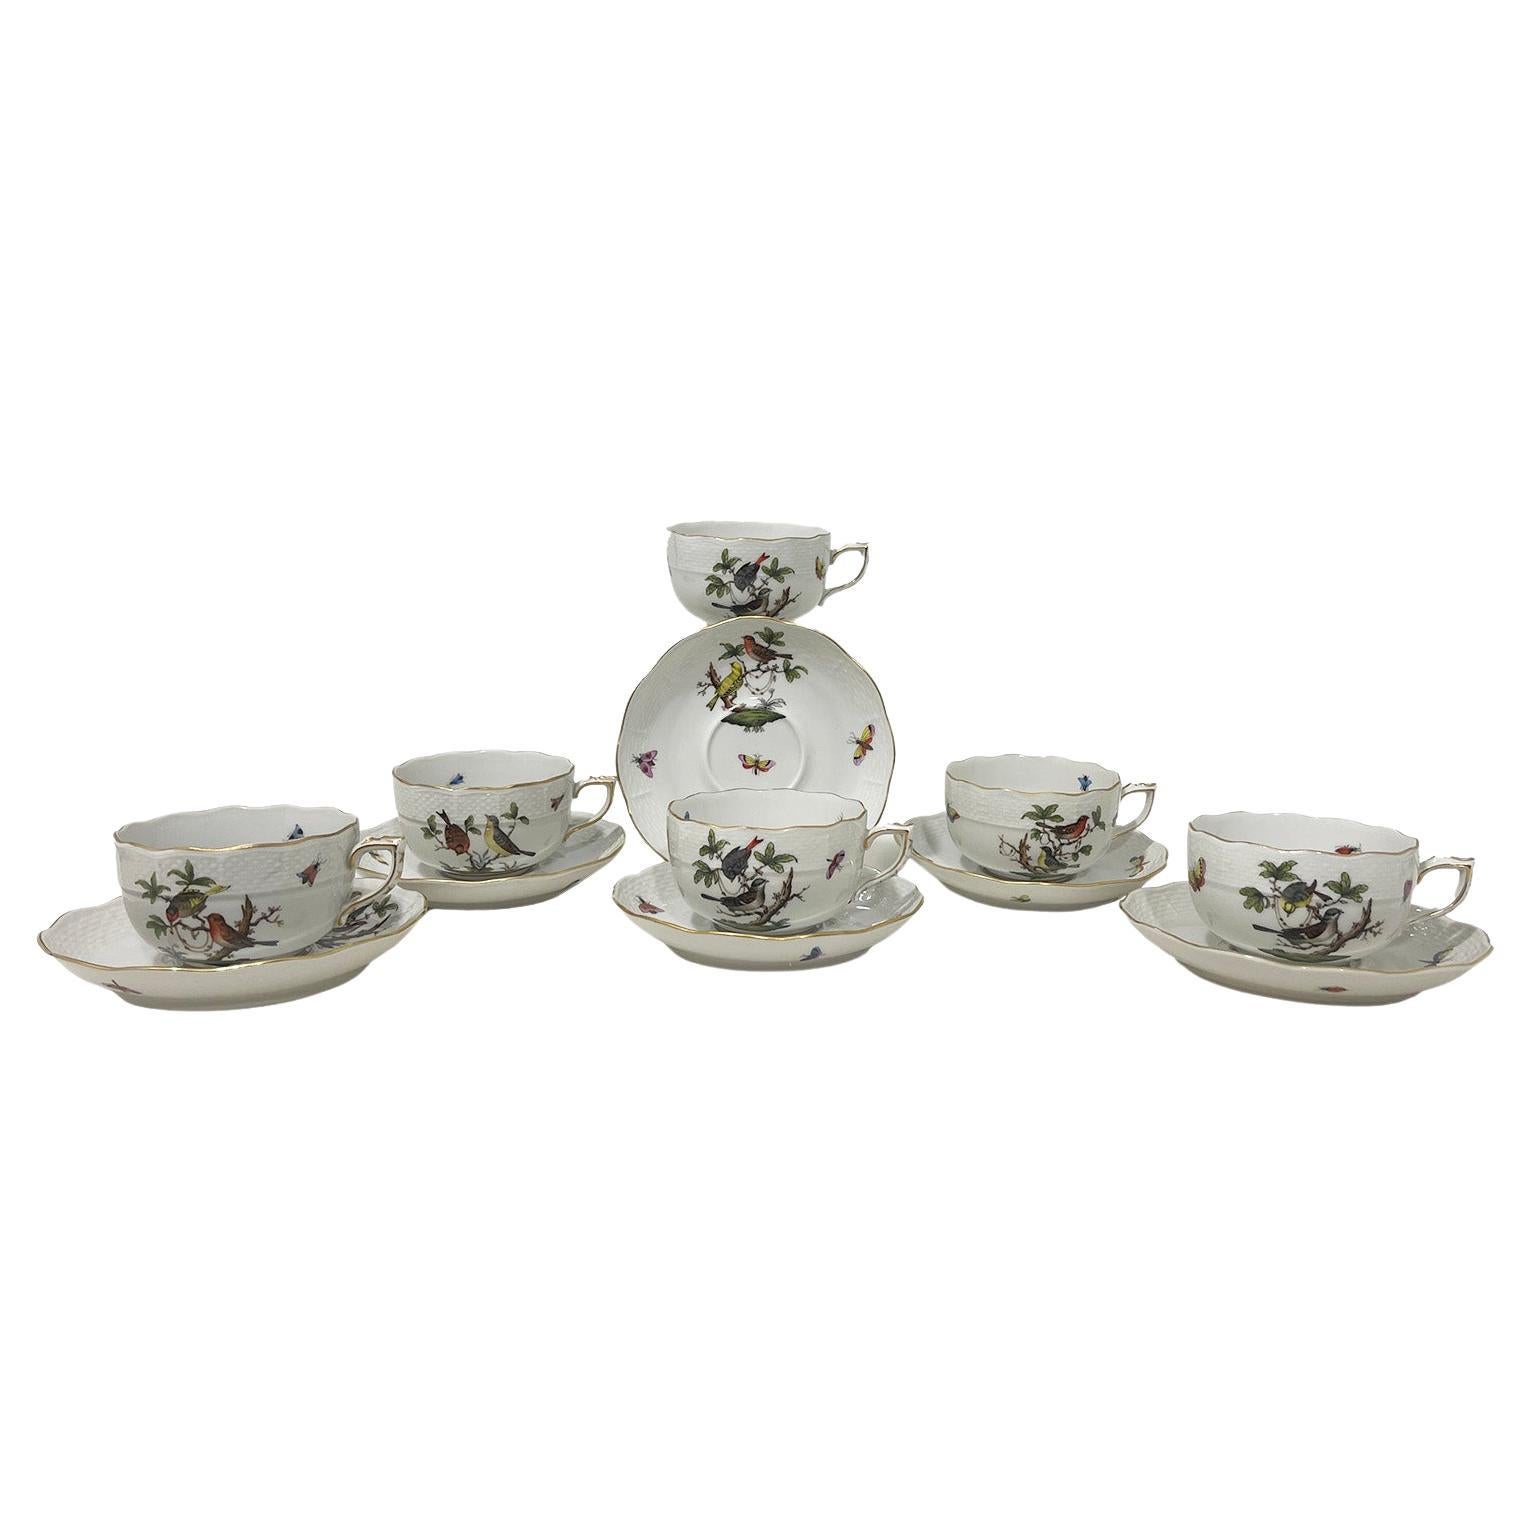 Herend Hungary Porcelain "Rothschild" Cups and saucers